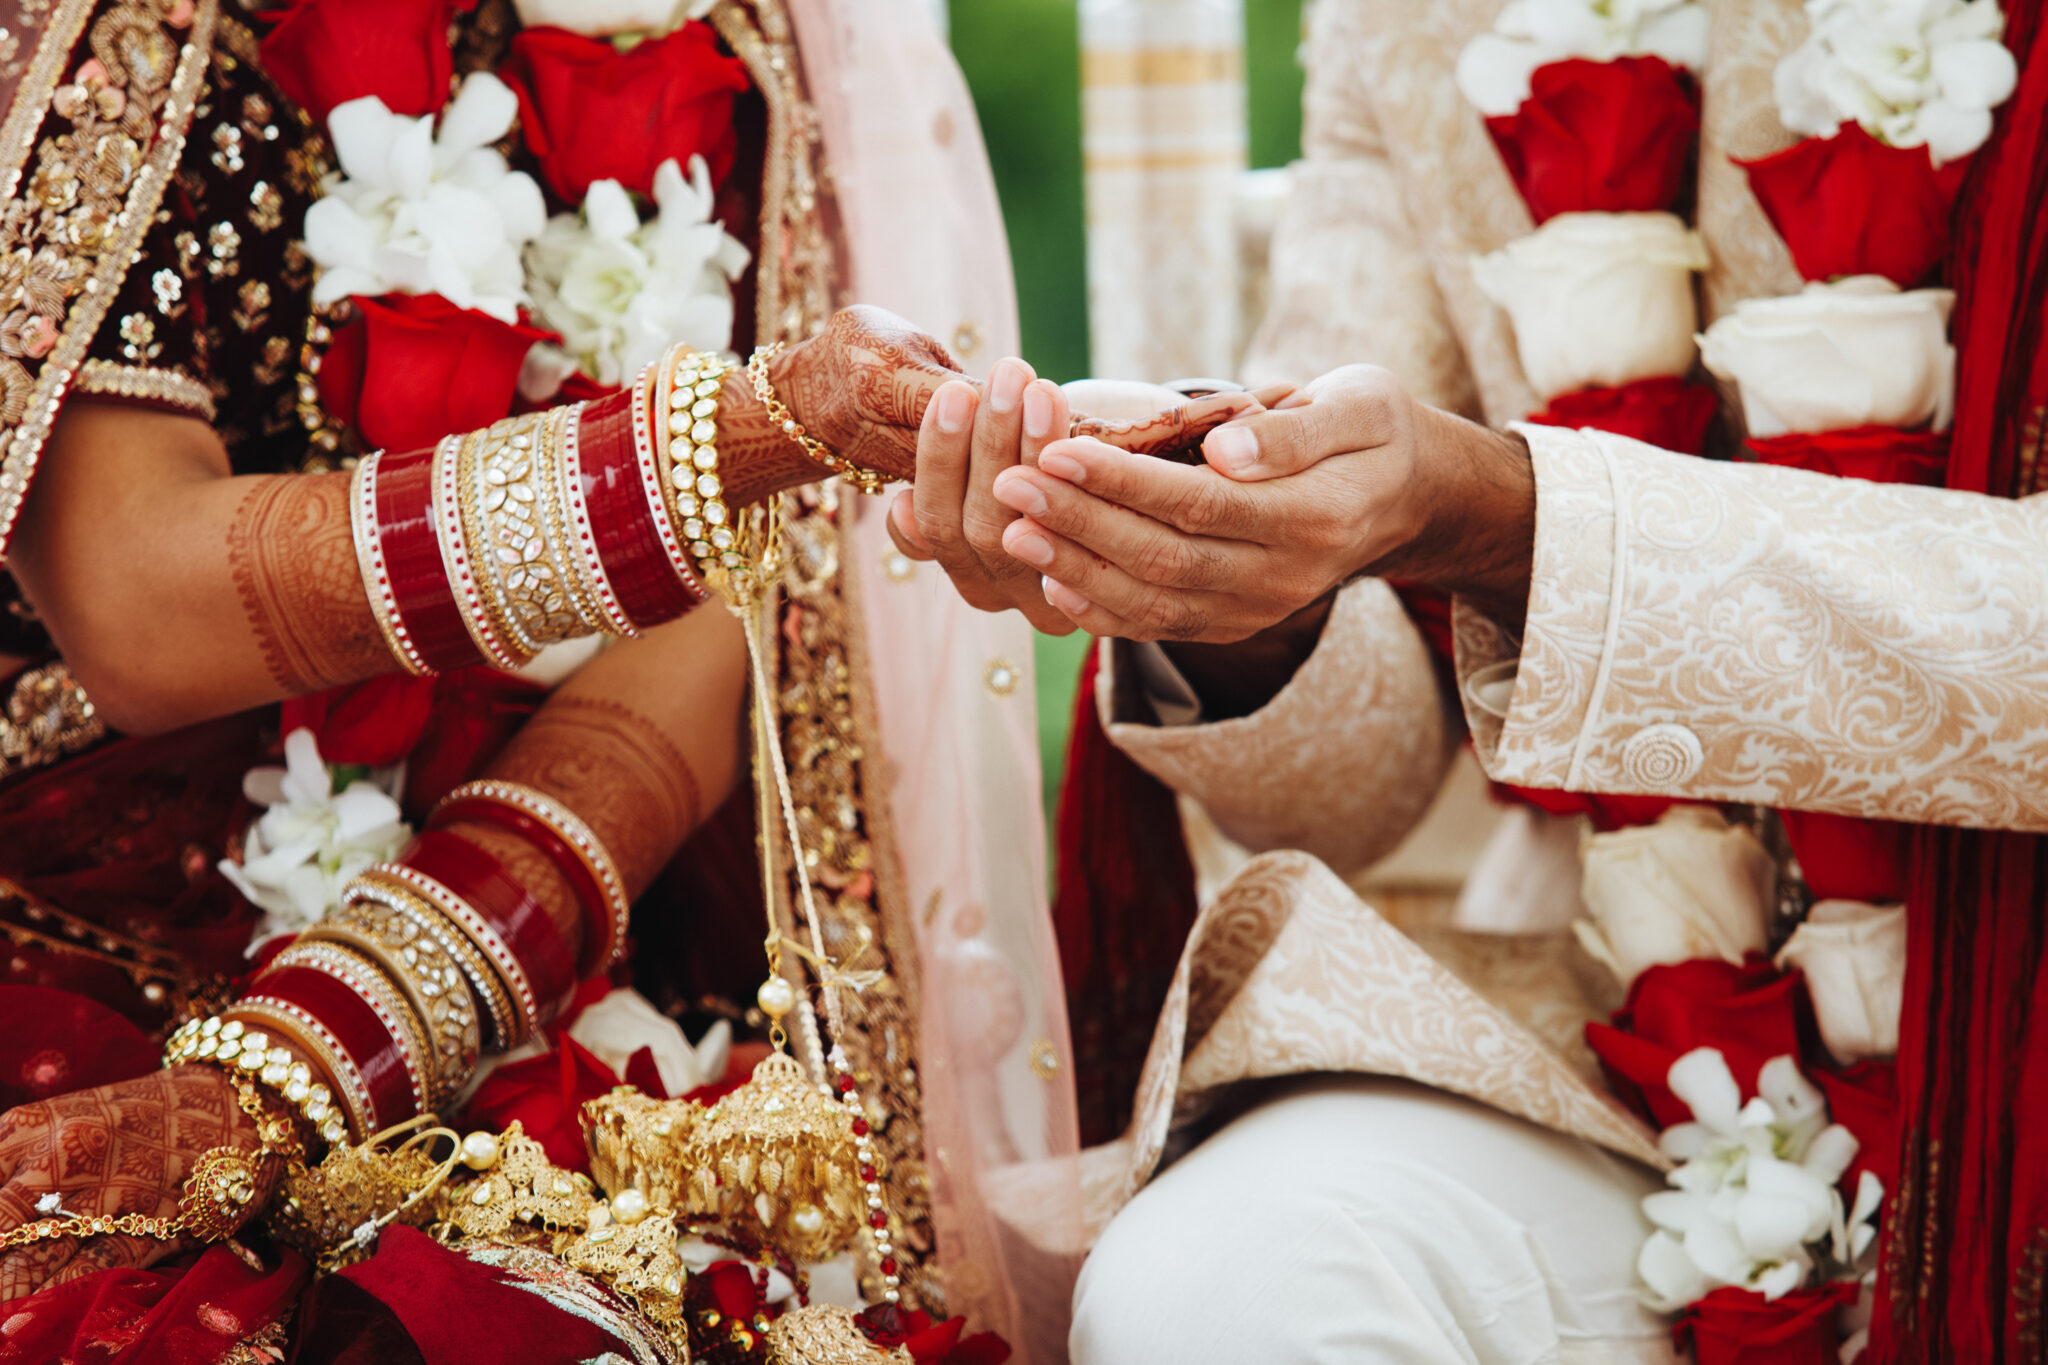 Hands of indian bride and groom intertwined together making auth